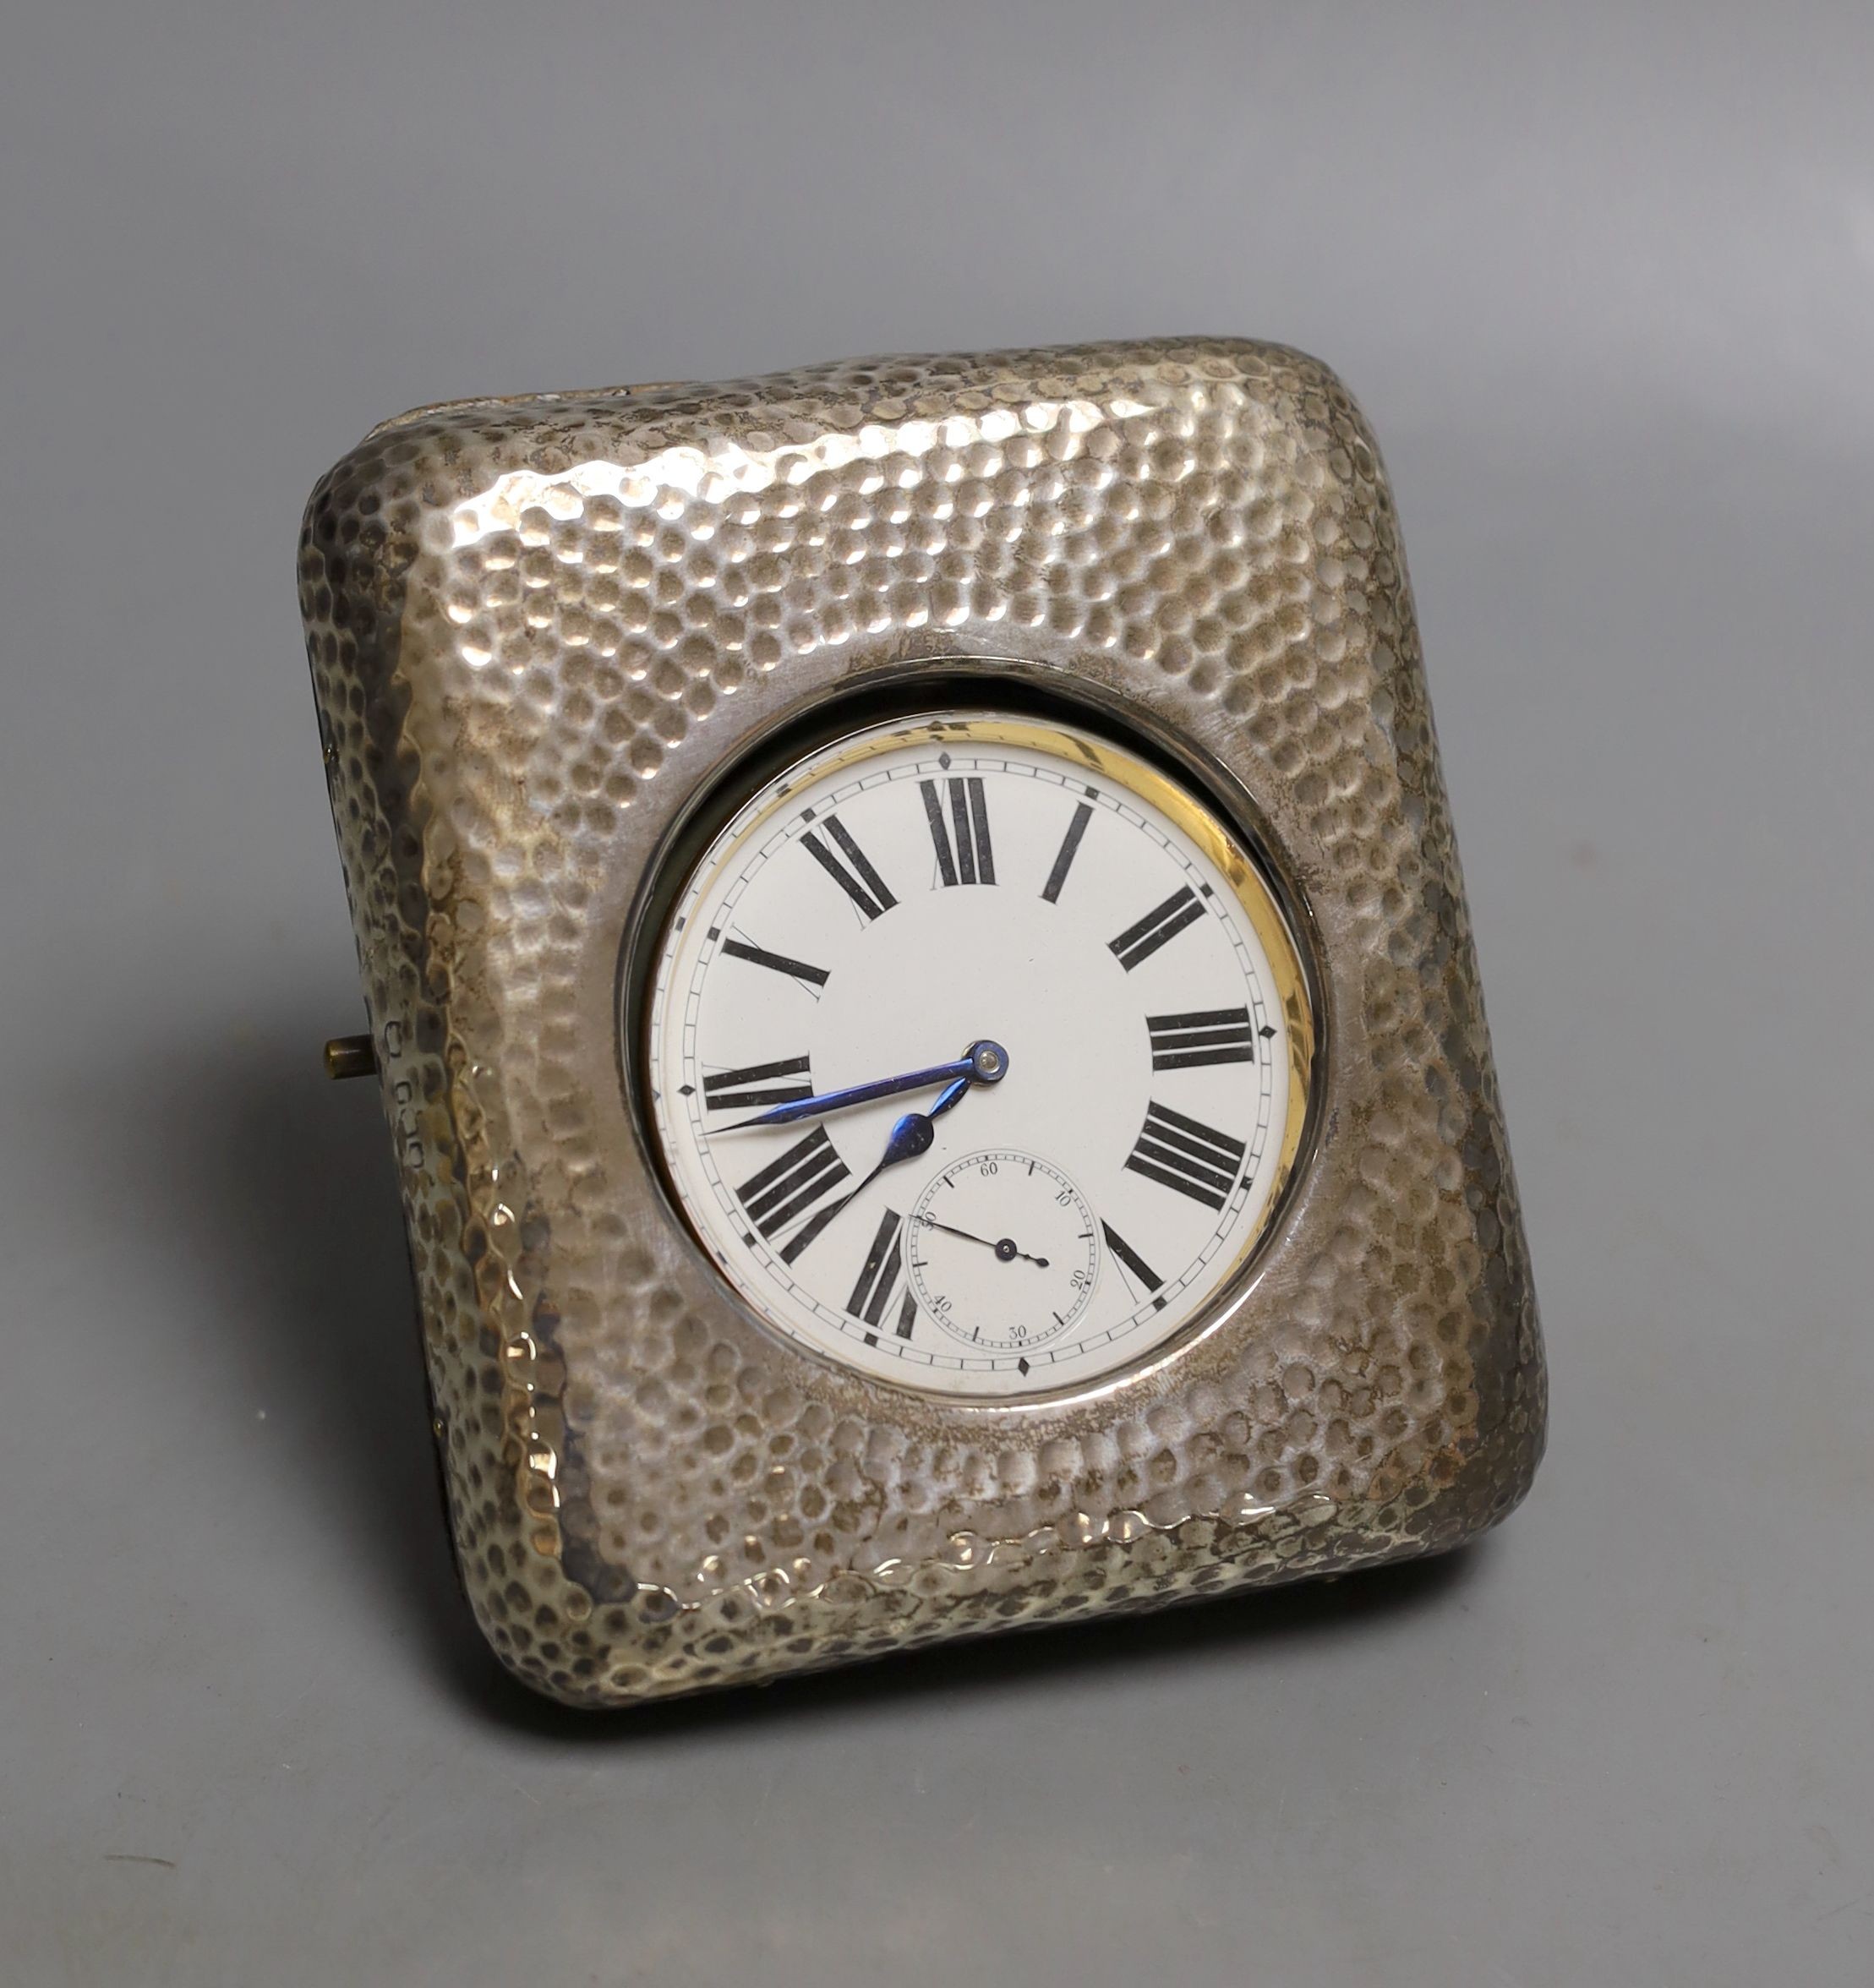 An early 20th century hammered silver mounted travelling watch case, marks rubbed, with keyless Goliath pocket watch.